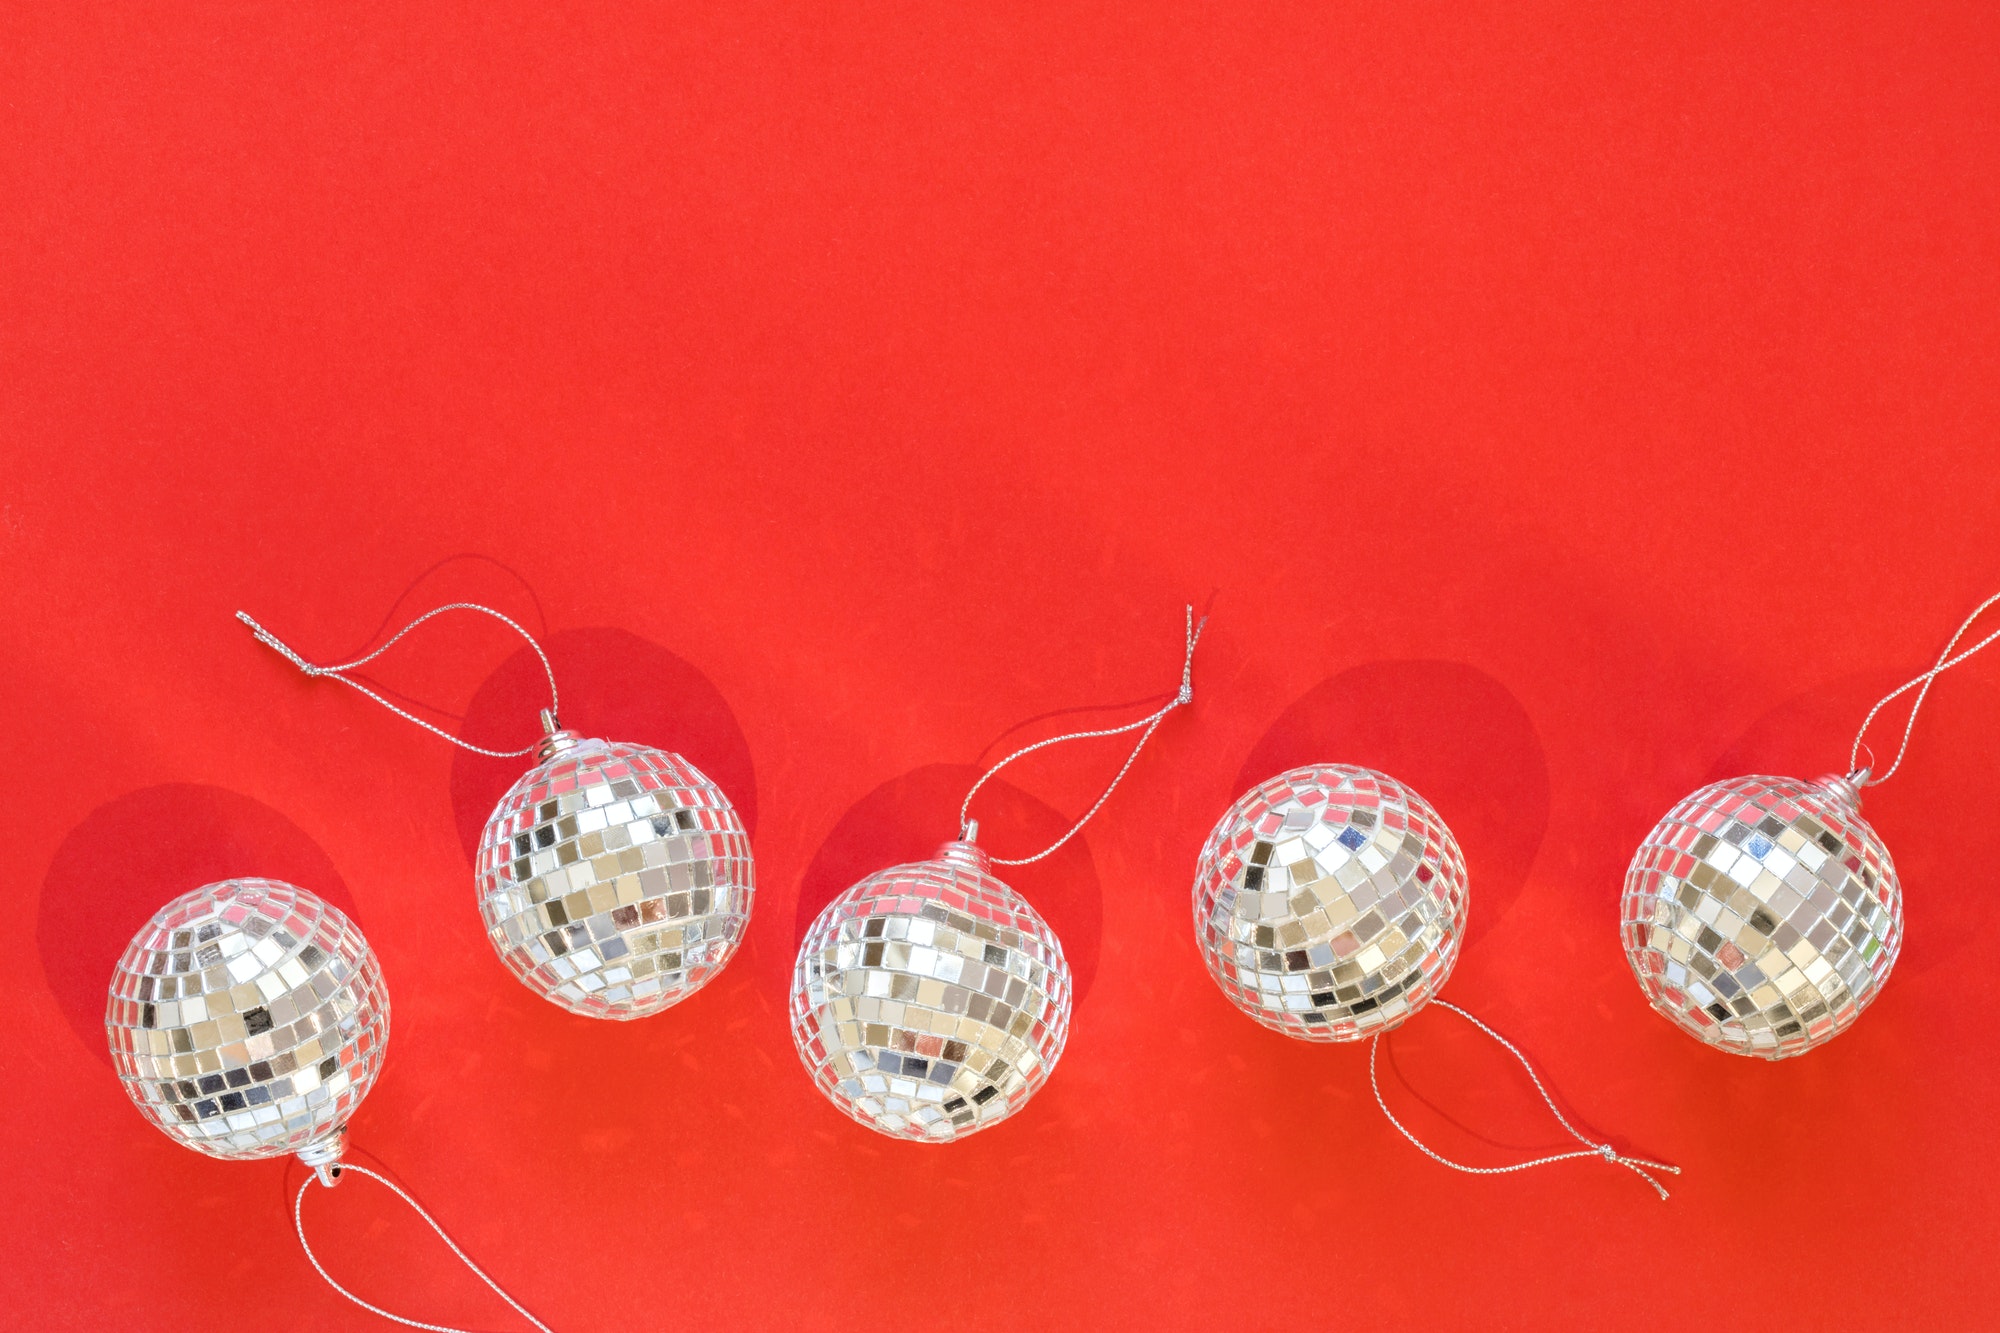 Mirror disco balls Greeting card concept voor Christmas, New Year, party